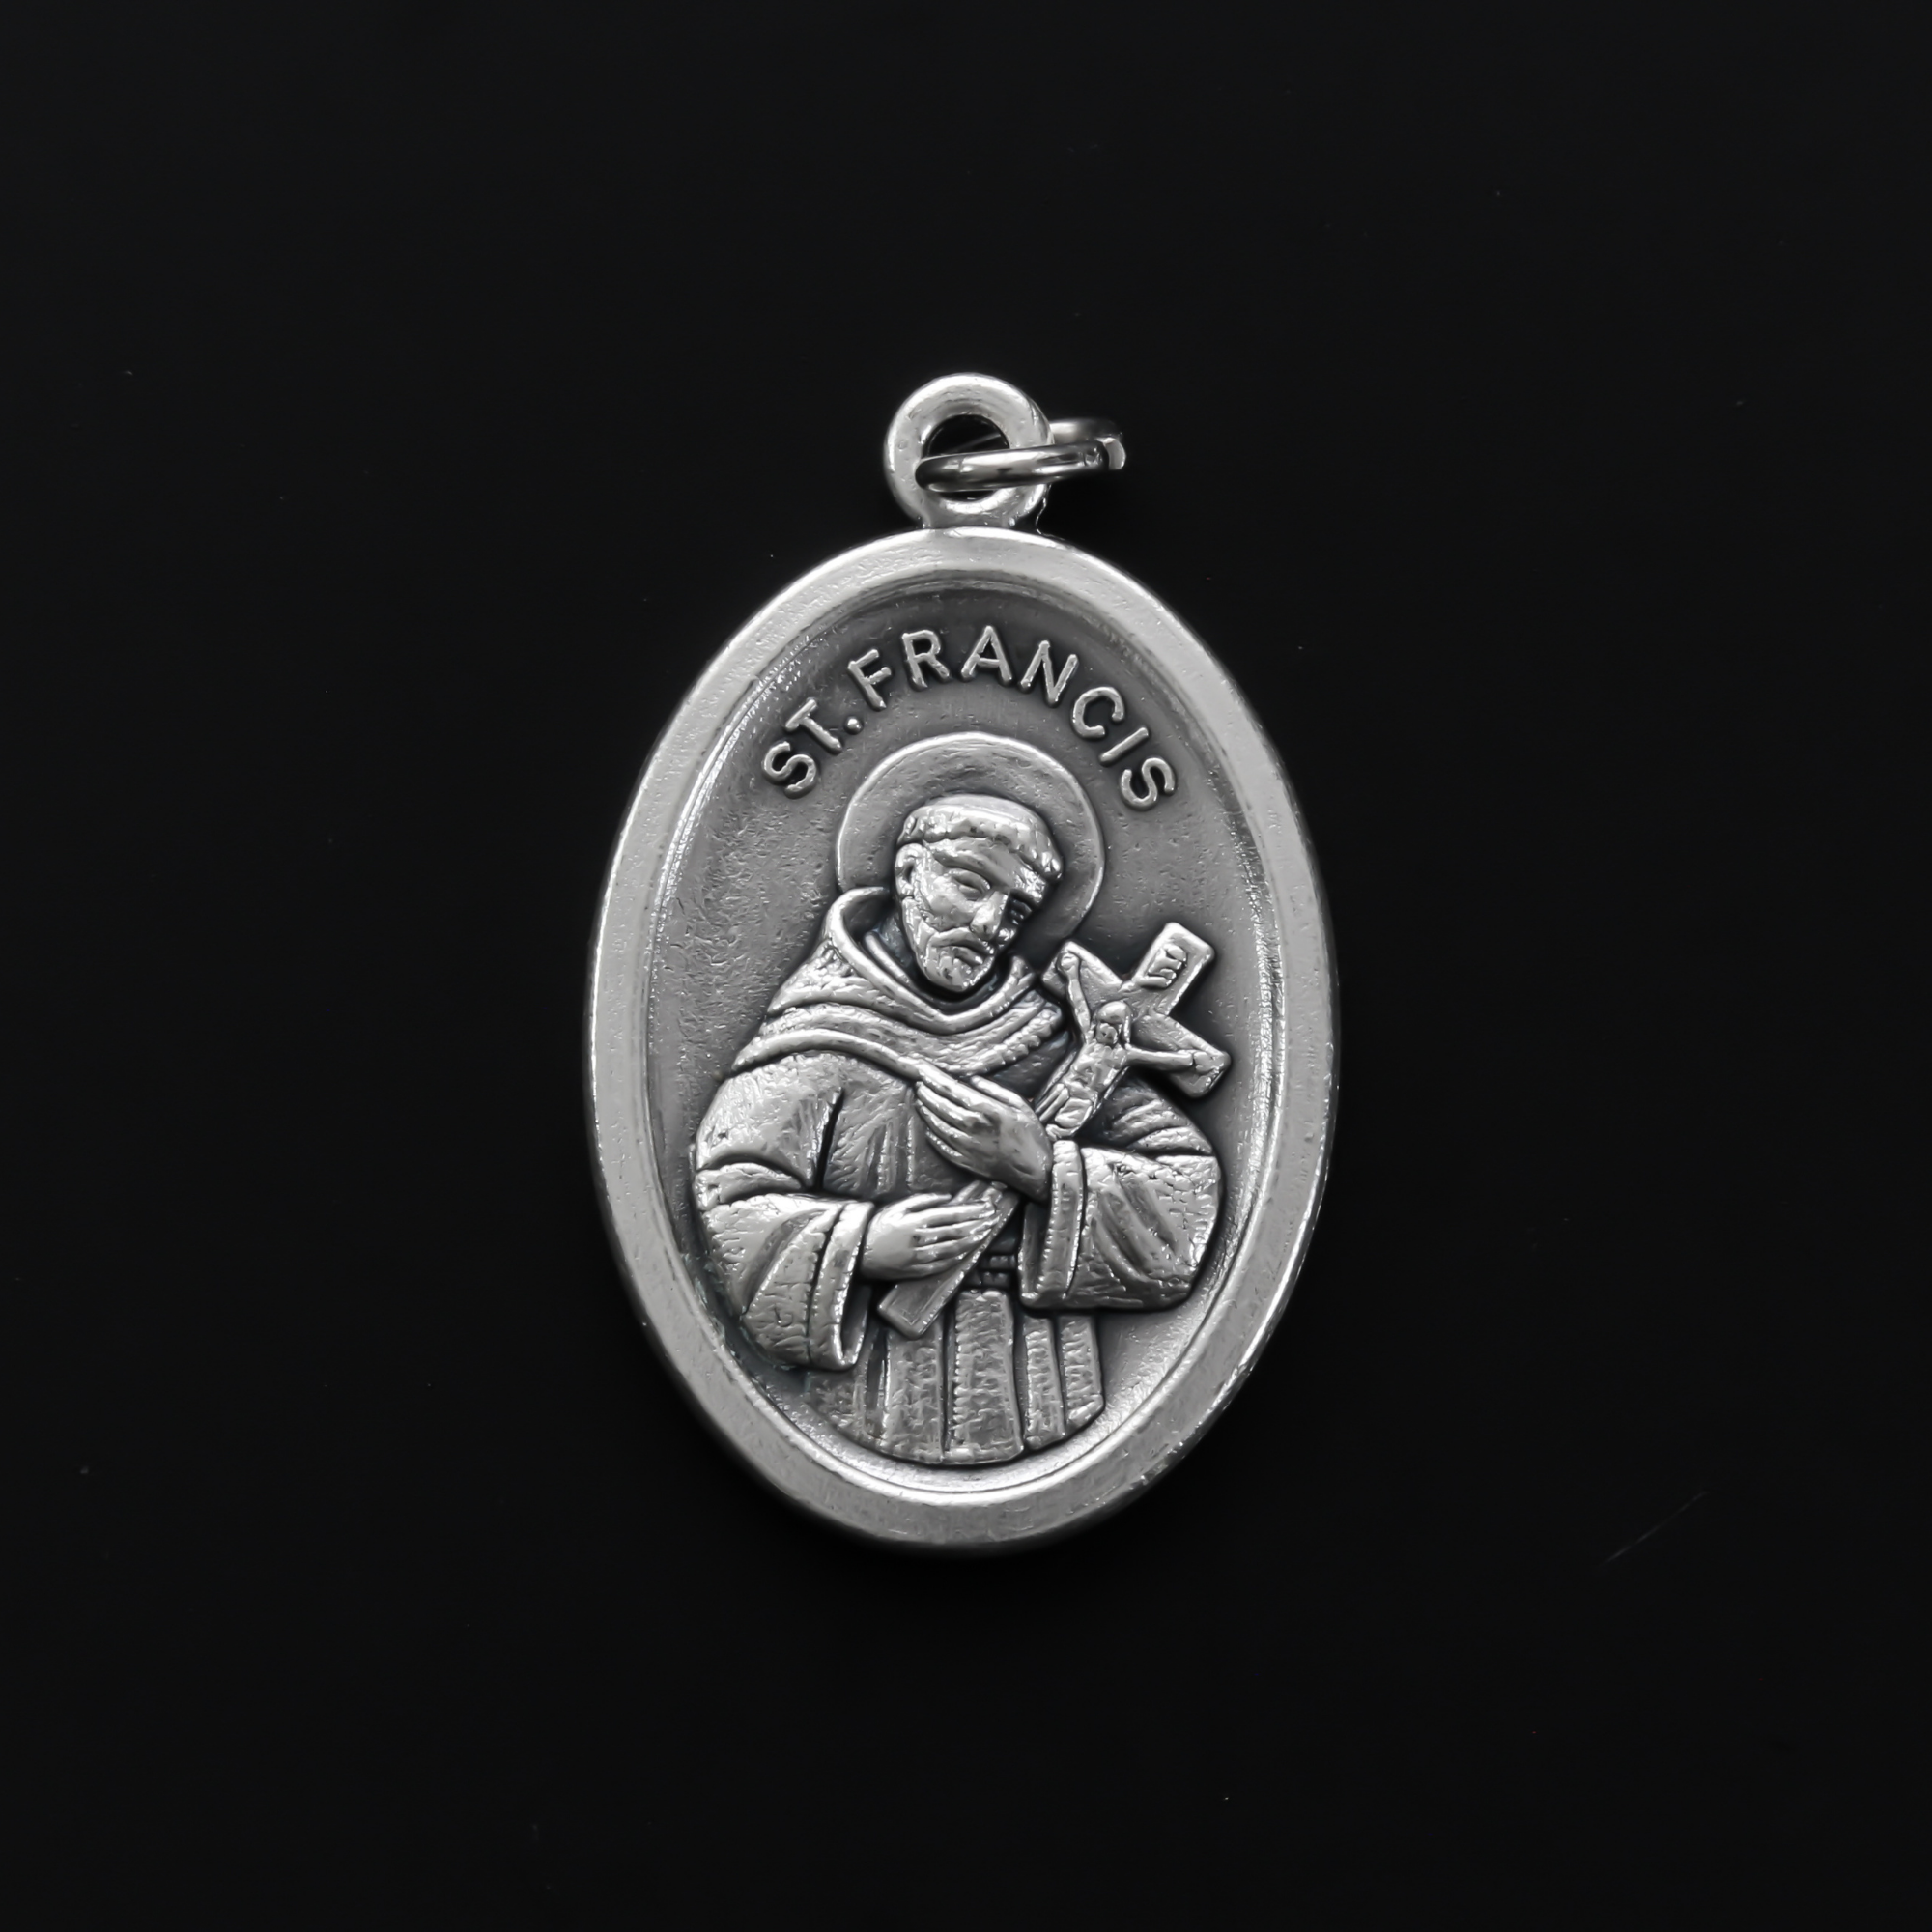 Saint Francis of Assisi medal that depicts the saint on the front and "Pray For Us" on the back